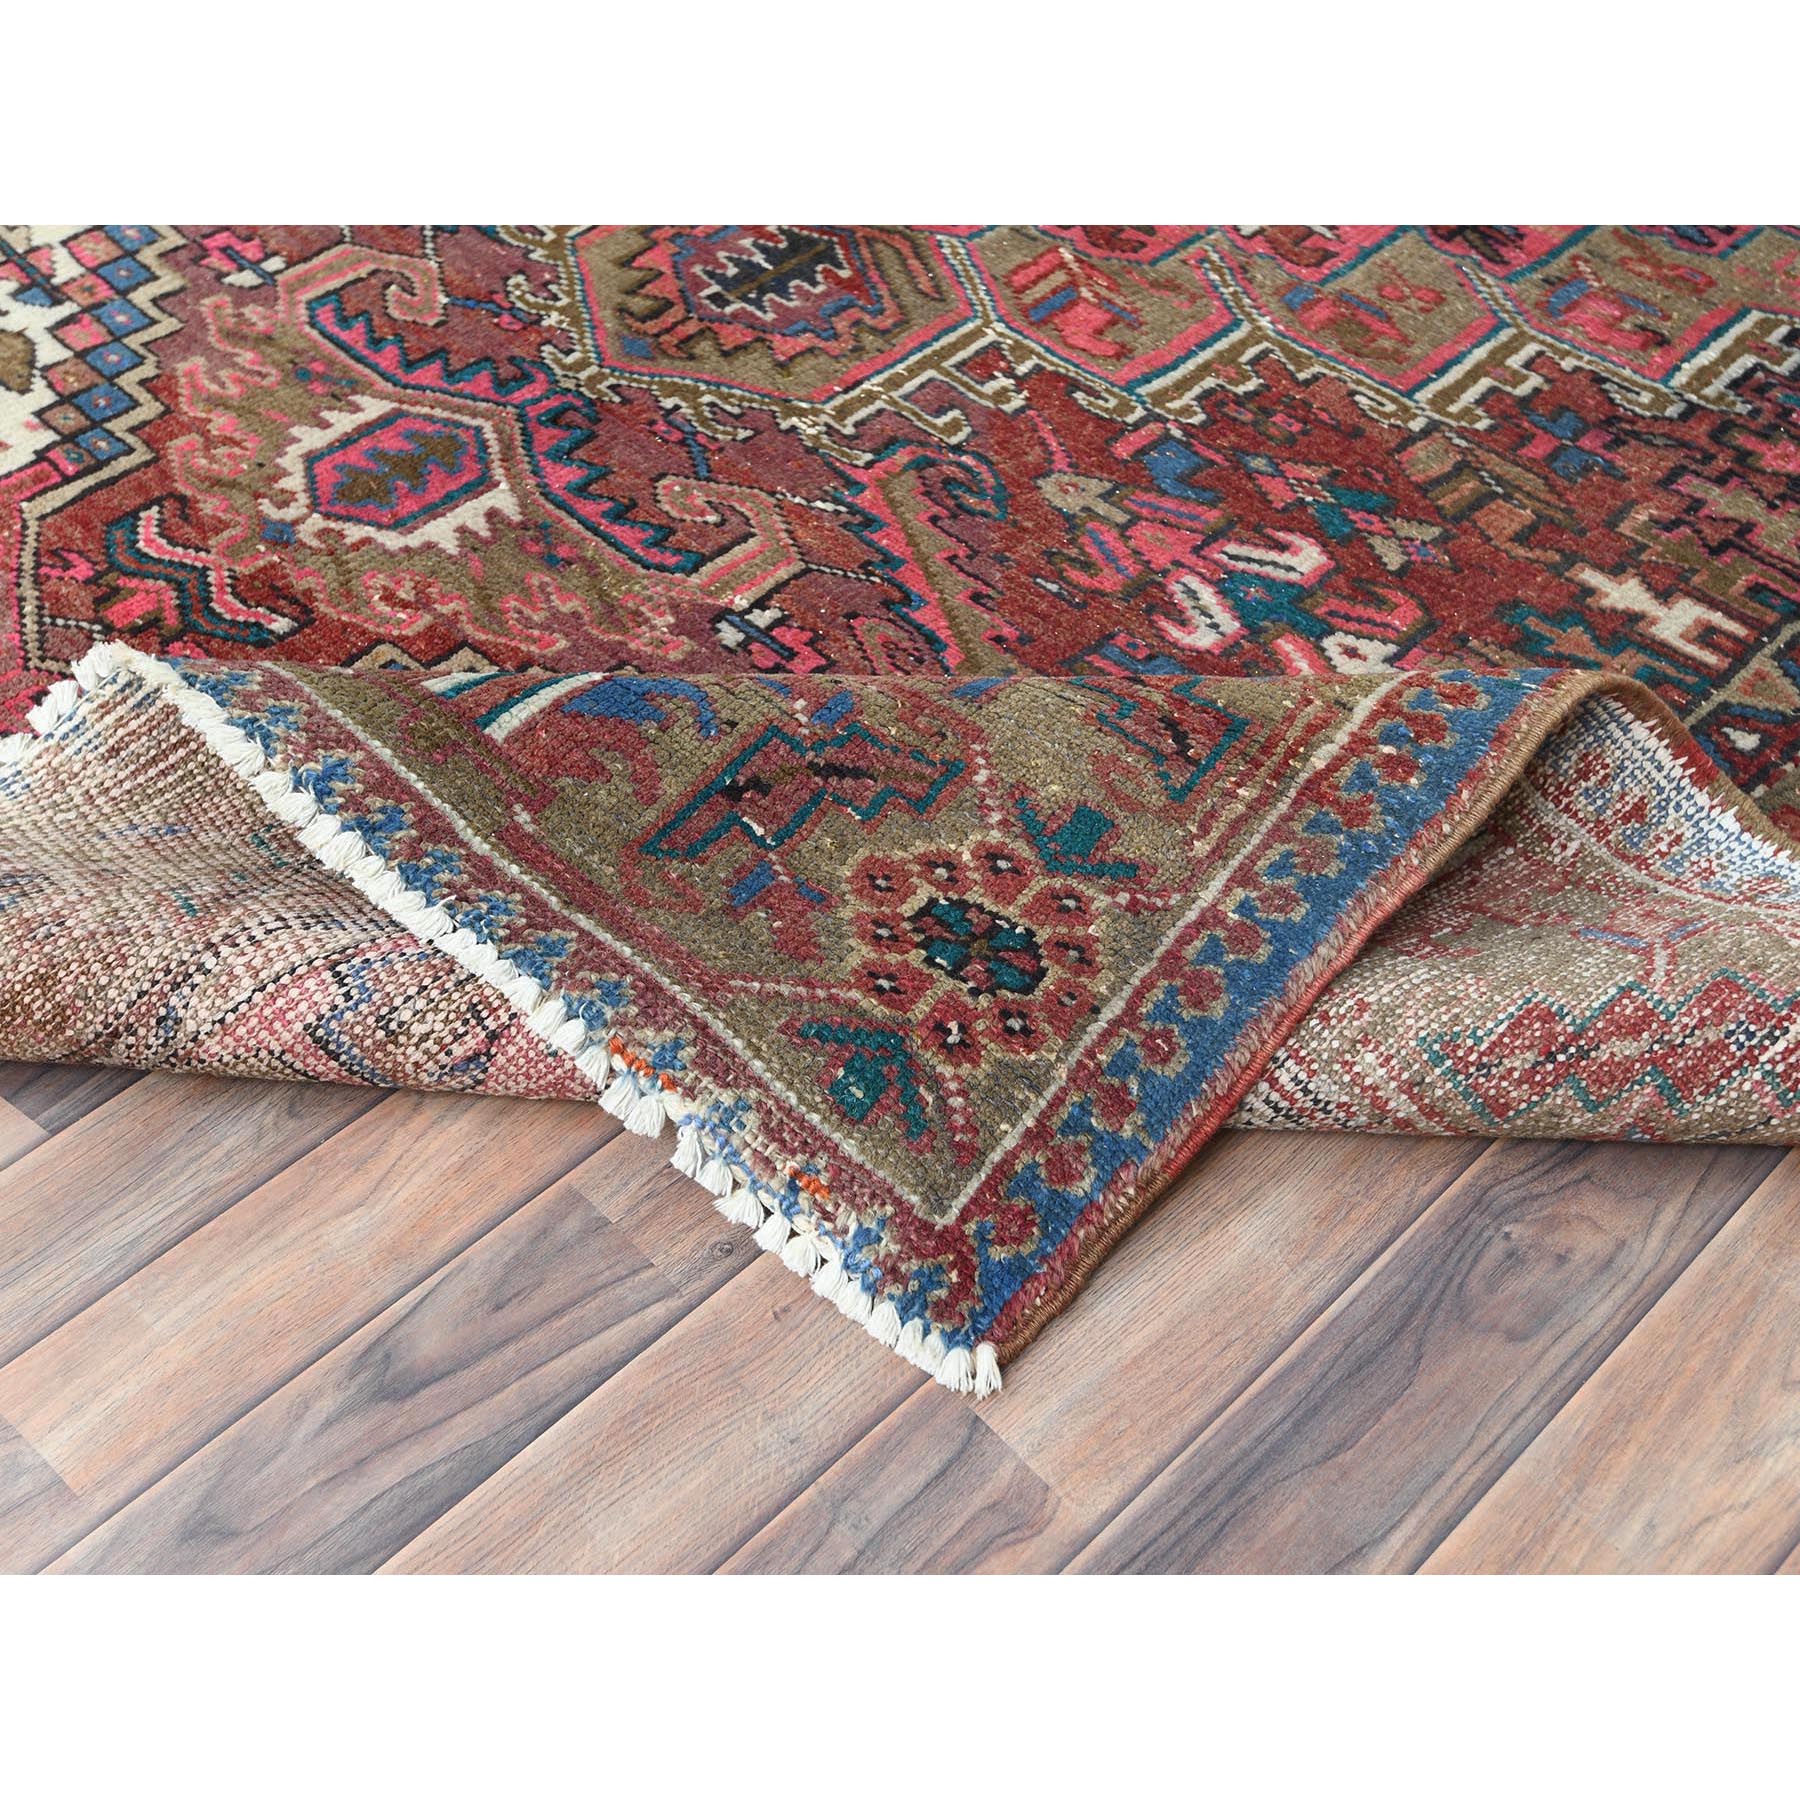  Wool Hand-Knotted Area Rug 6'9